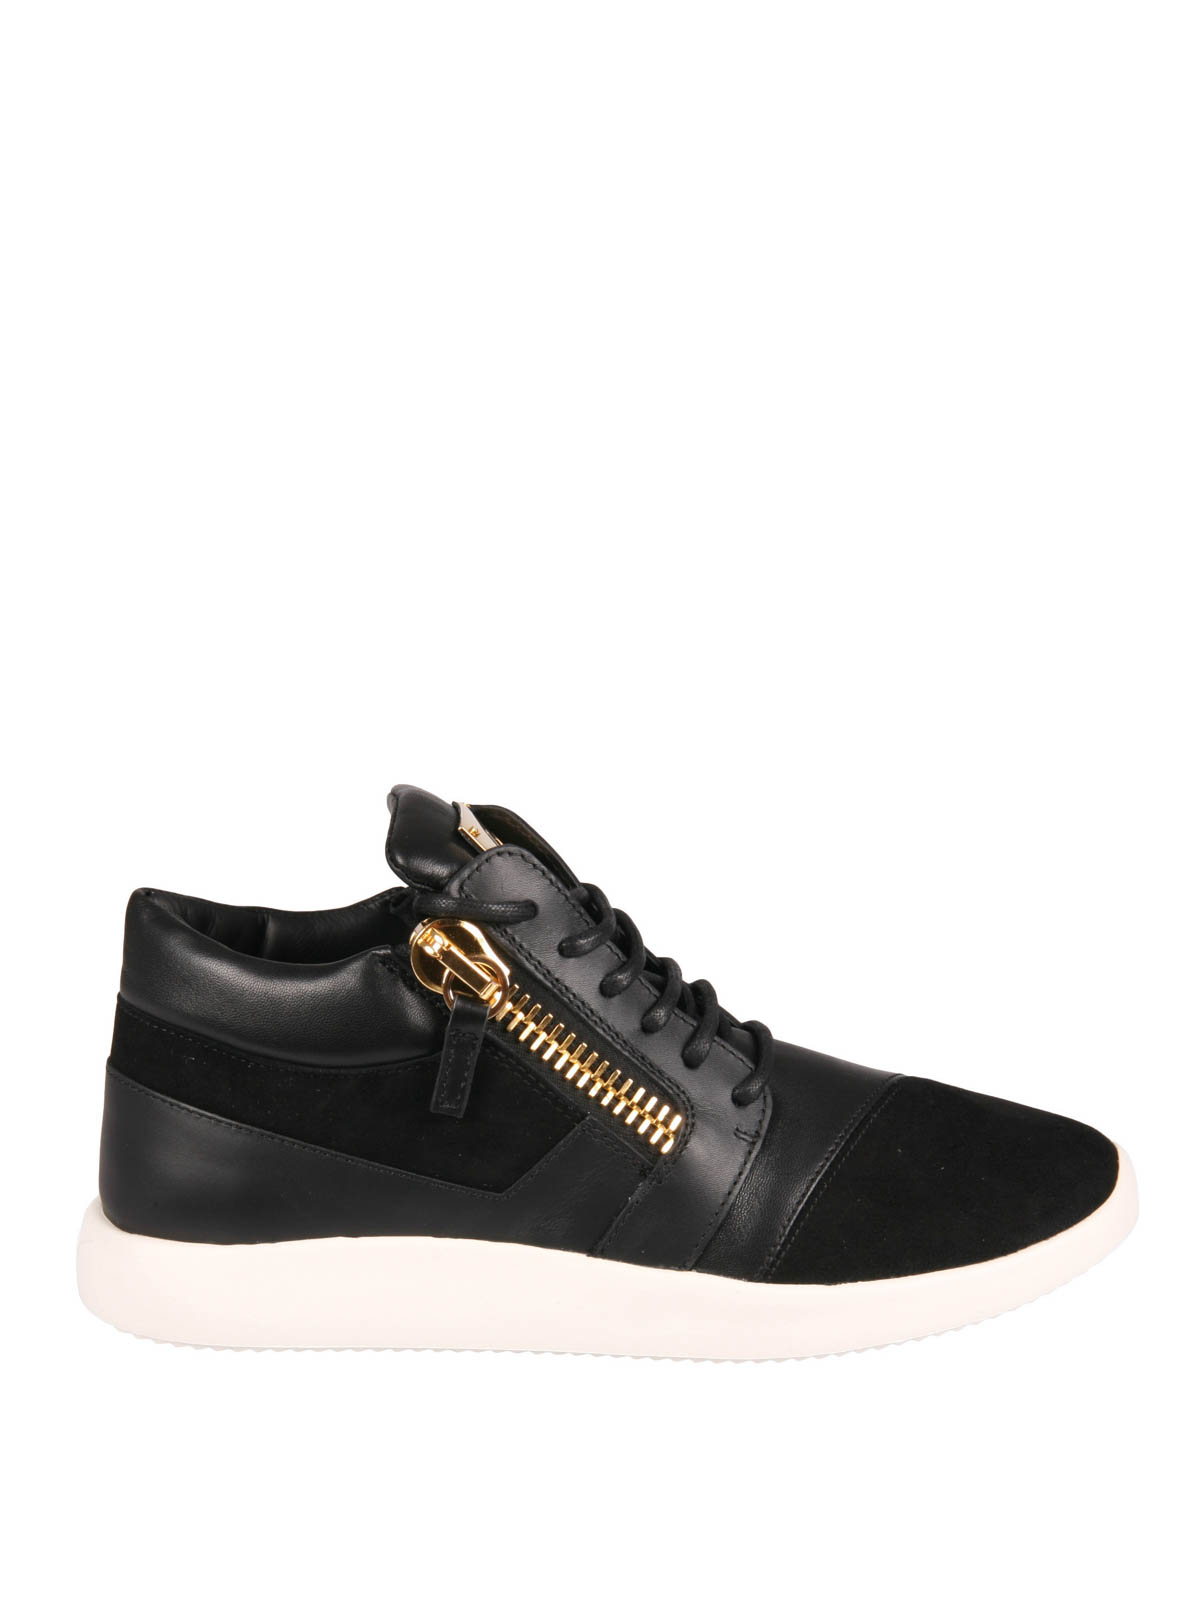 Nappa leather running shoes - trainers 